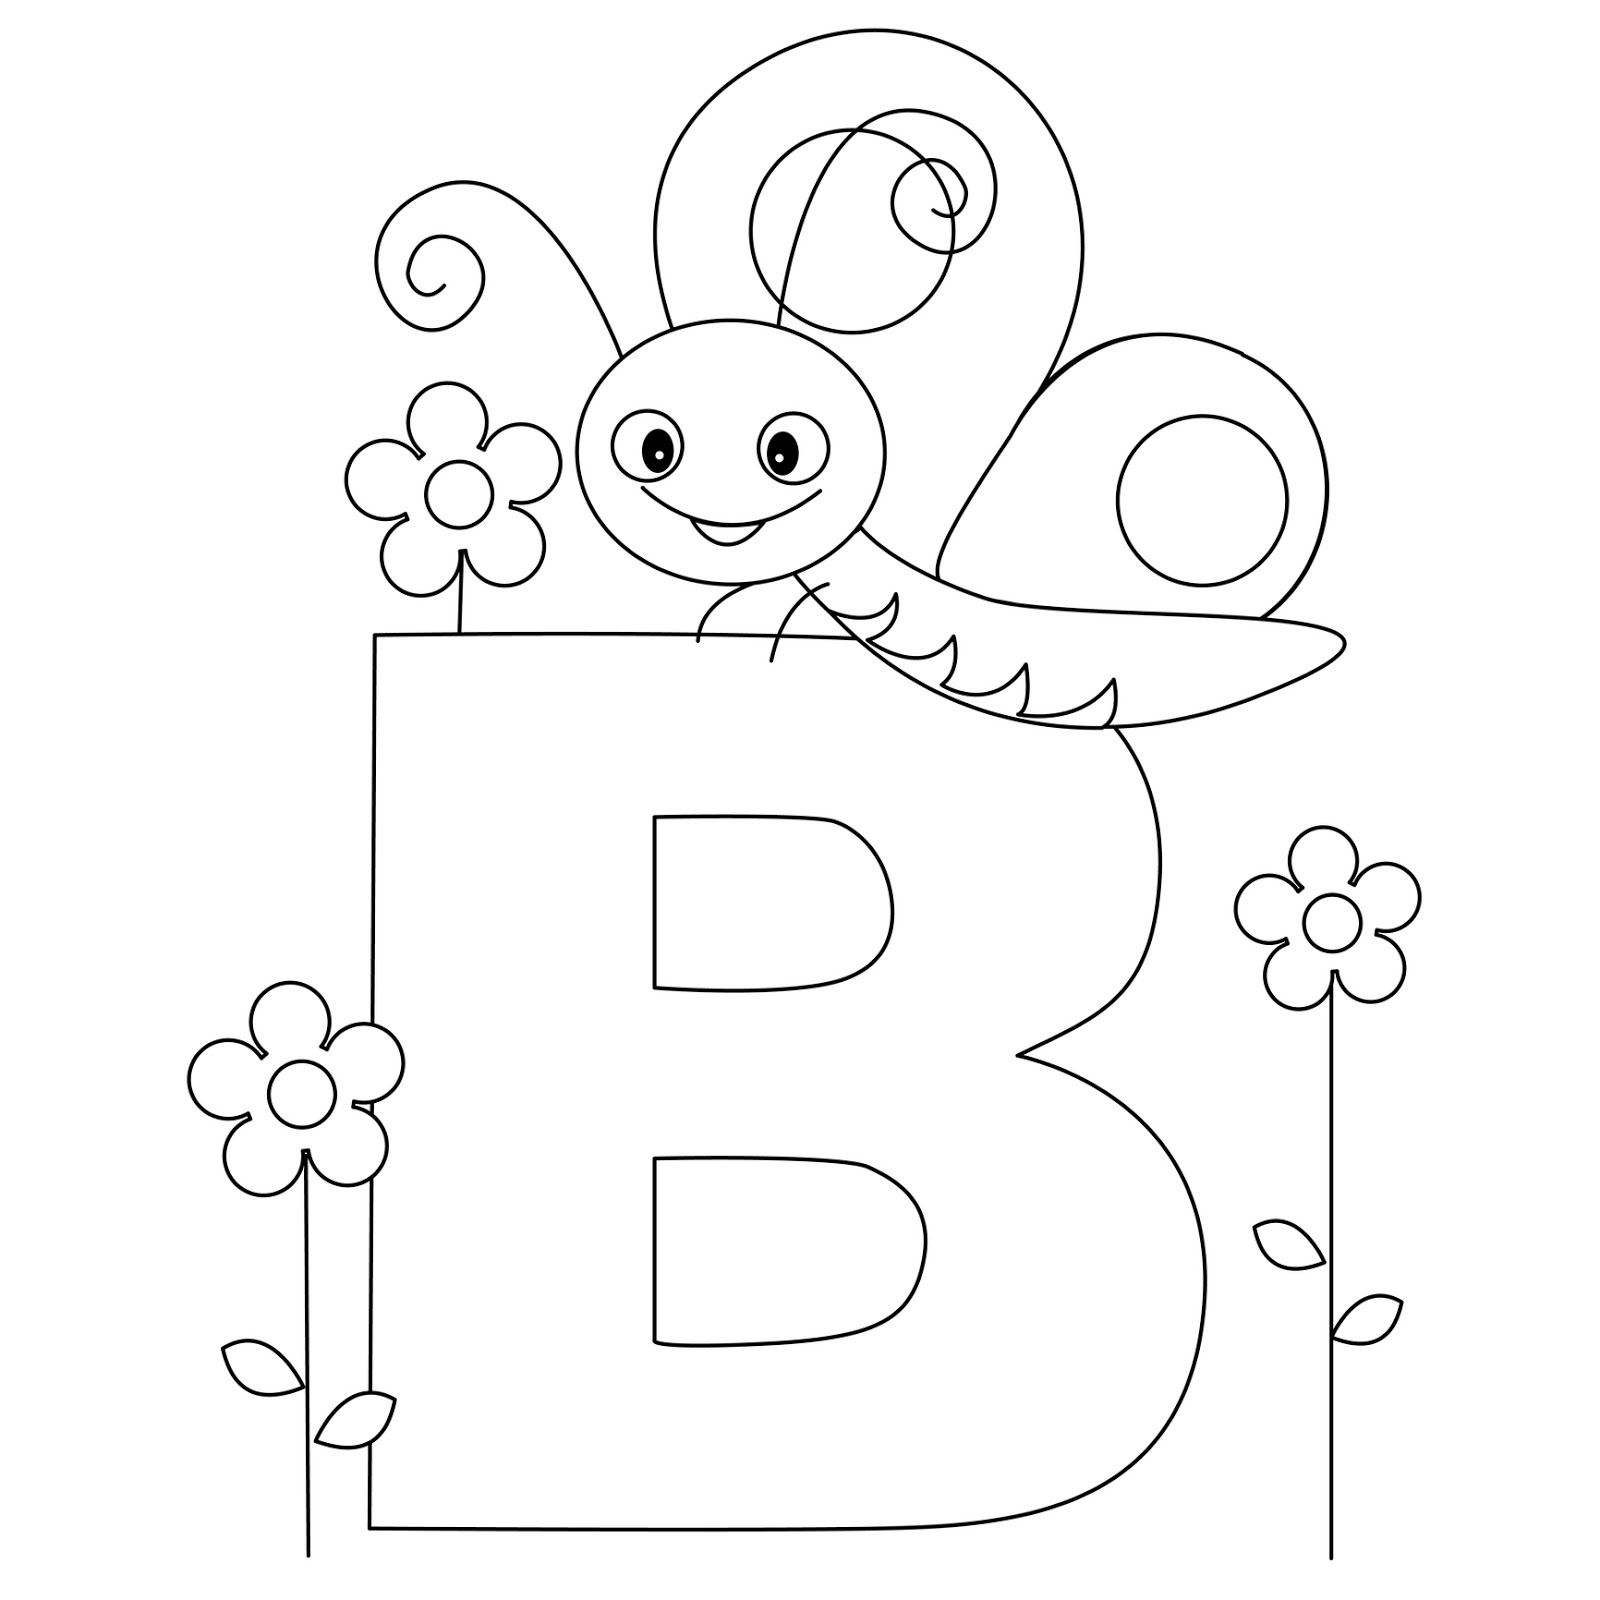 Letter b coloring pages to download and print for free